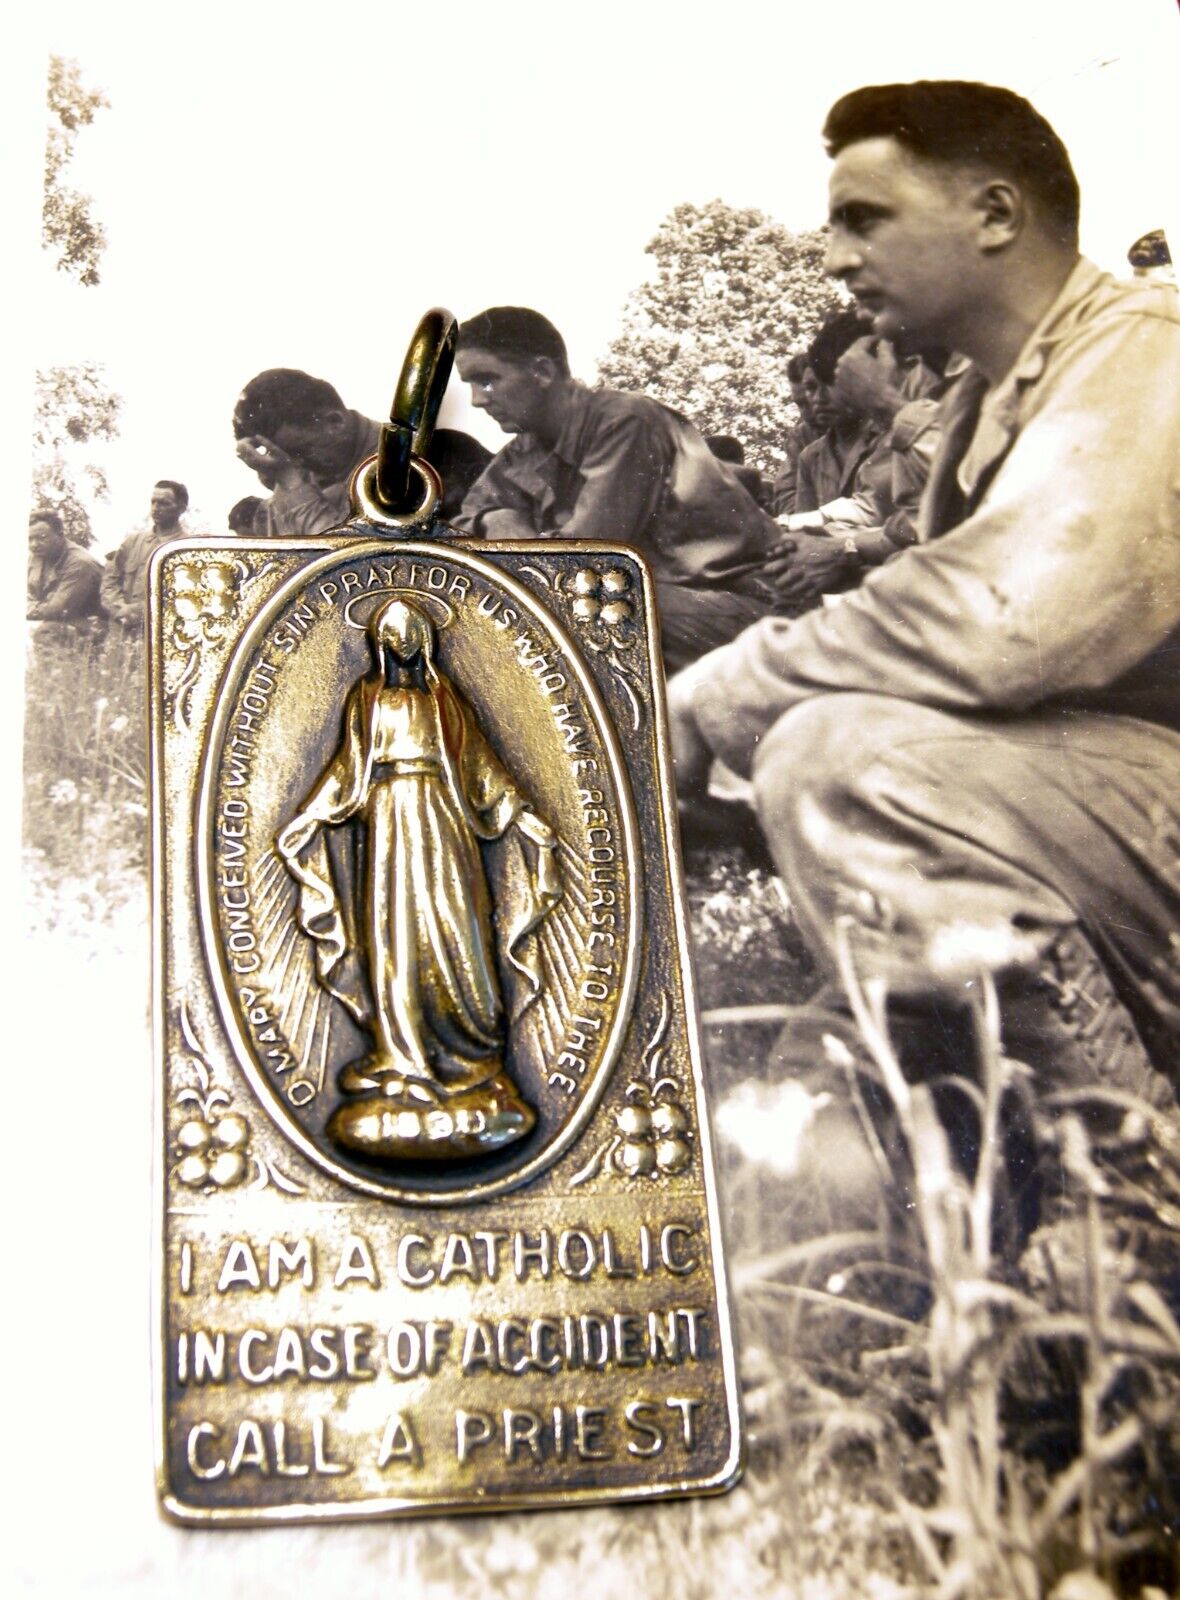 CHAPLAIN WWII VINTAGE PICTURE DOG TAG CHAIN CATHOLIC MIRACULOUS MEDAL TRENCH ART